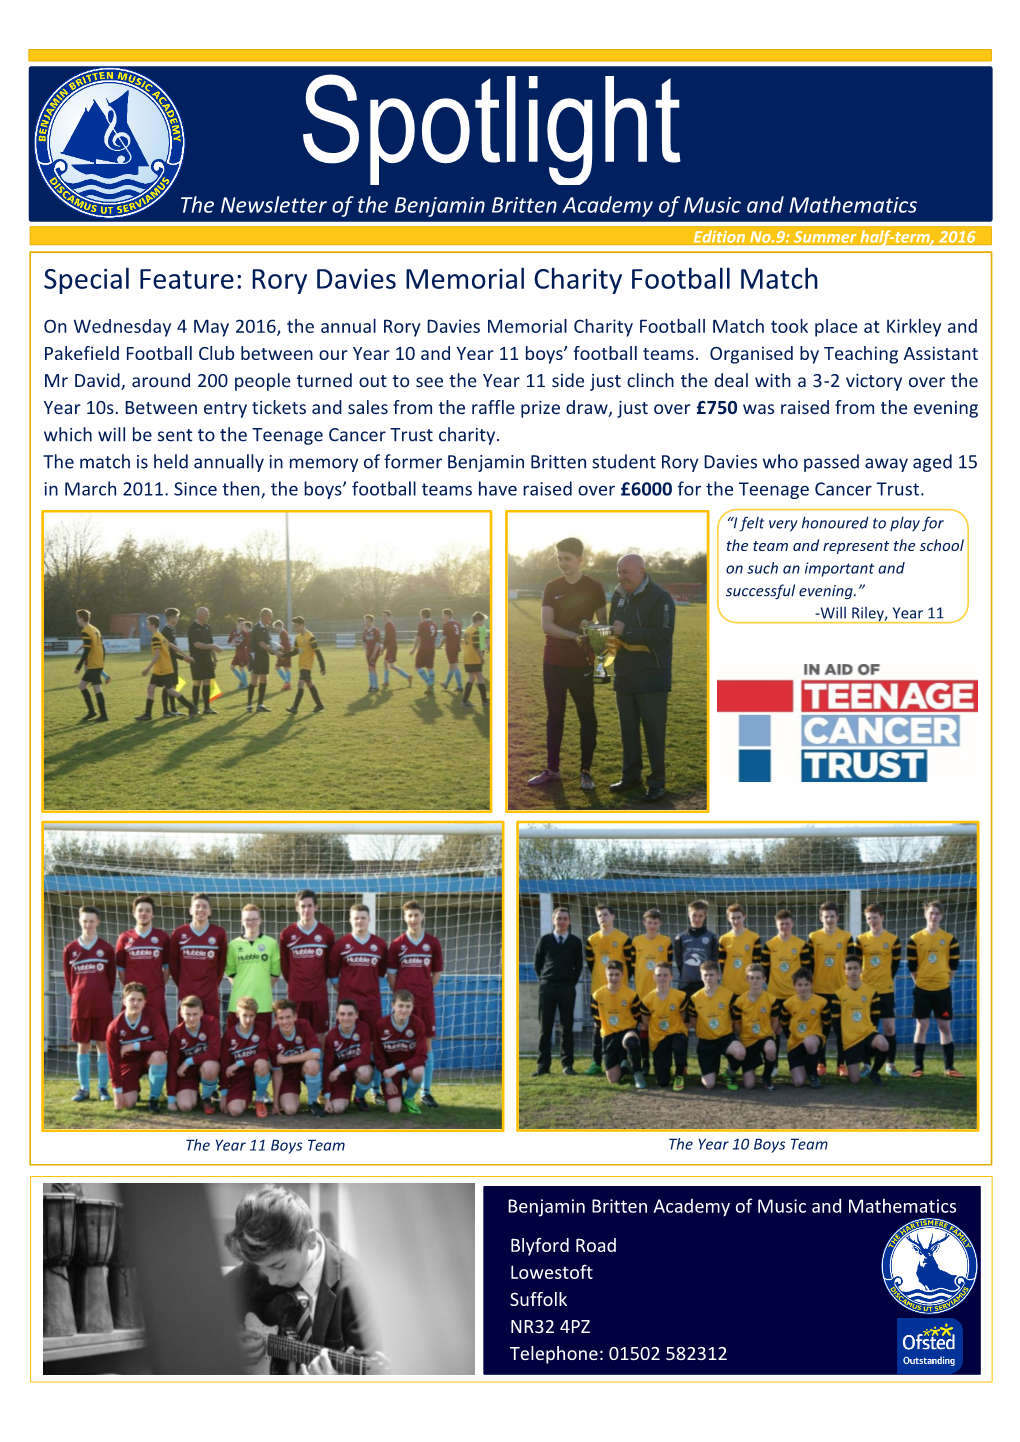 Special Feature: Rory Davies Memorial Charity Football Match